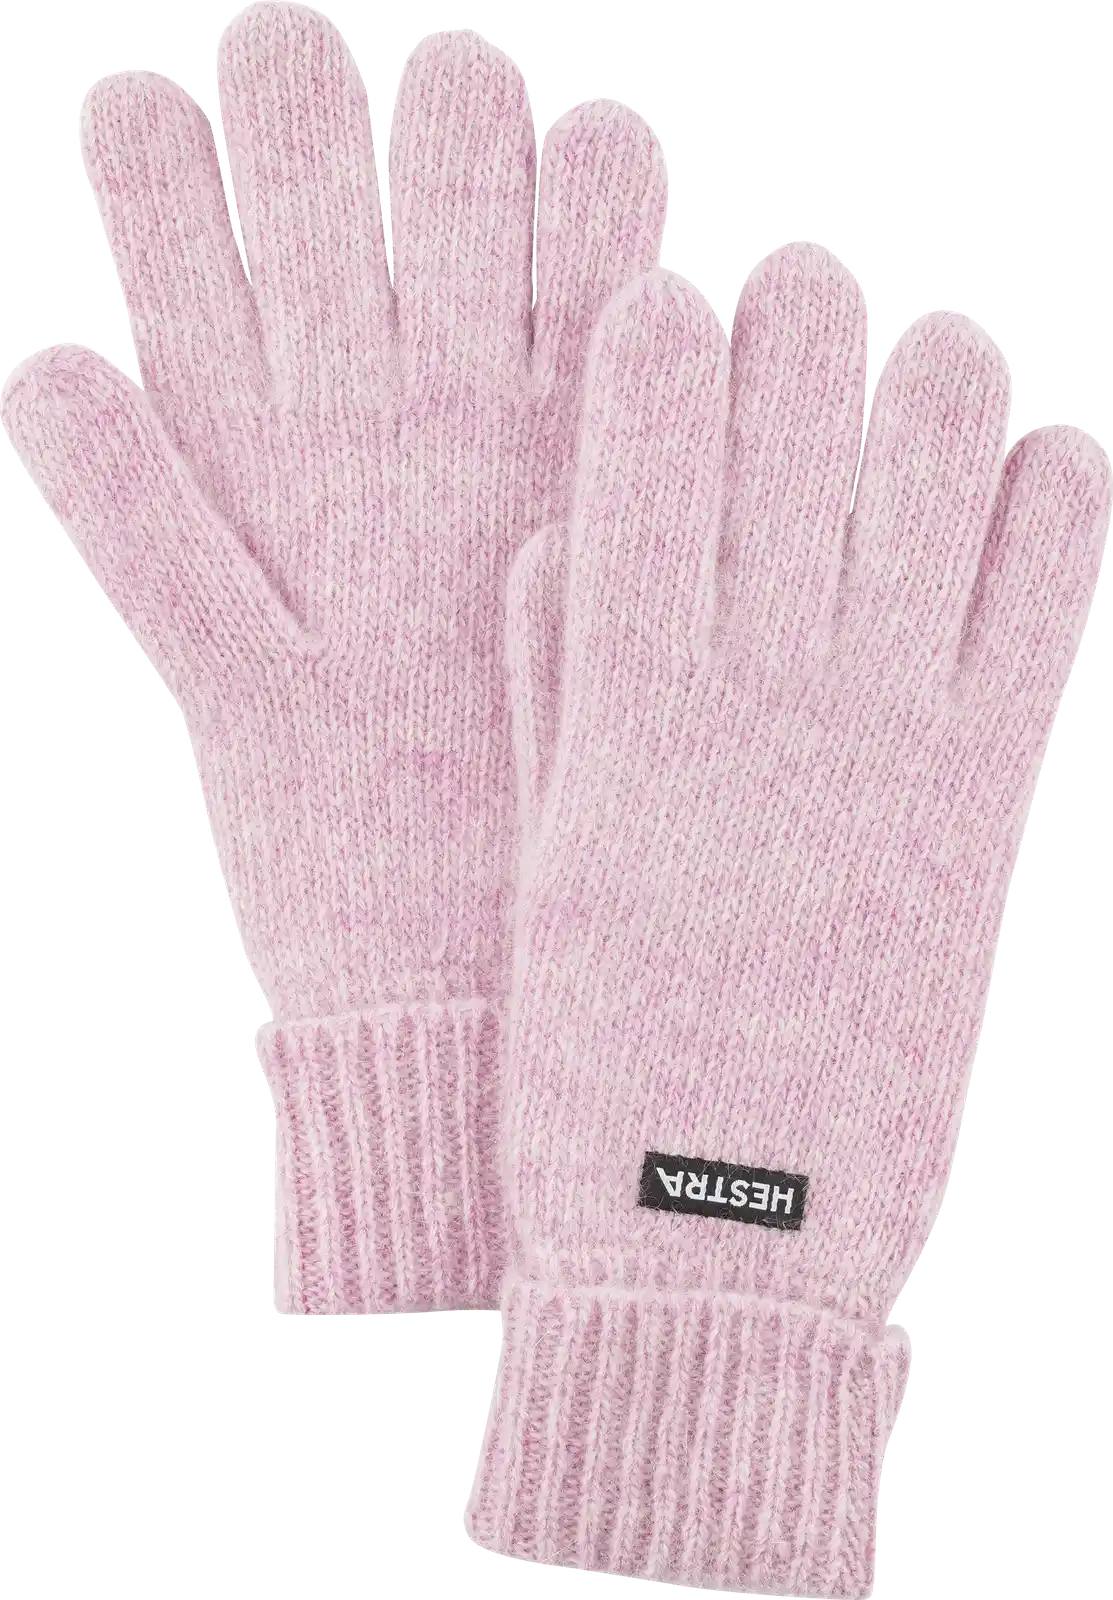 LIOOBO 1Pair Girls Gloves Suede Leather Free Size Warm Winter Cycling Sports Travel Outdoor Mittens Xmas Gift with String Pink 